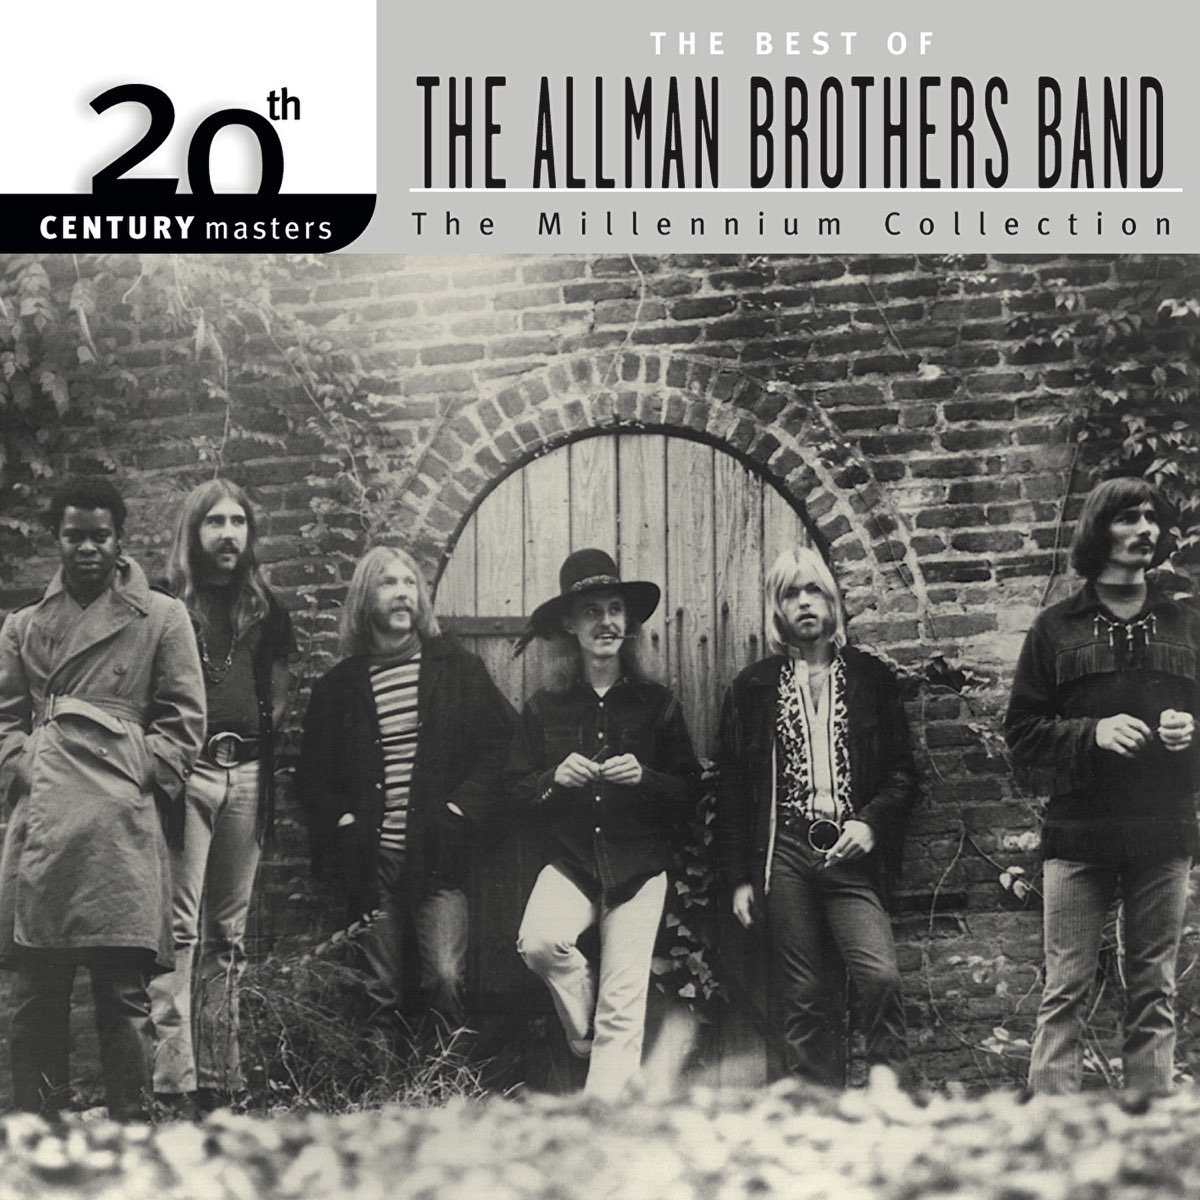 20th Century Masters – The Millennium Collection: The Best of The Allman Brothers Band    国または地域を選択国または地域を選択